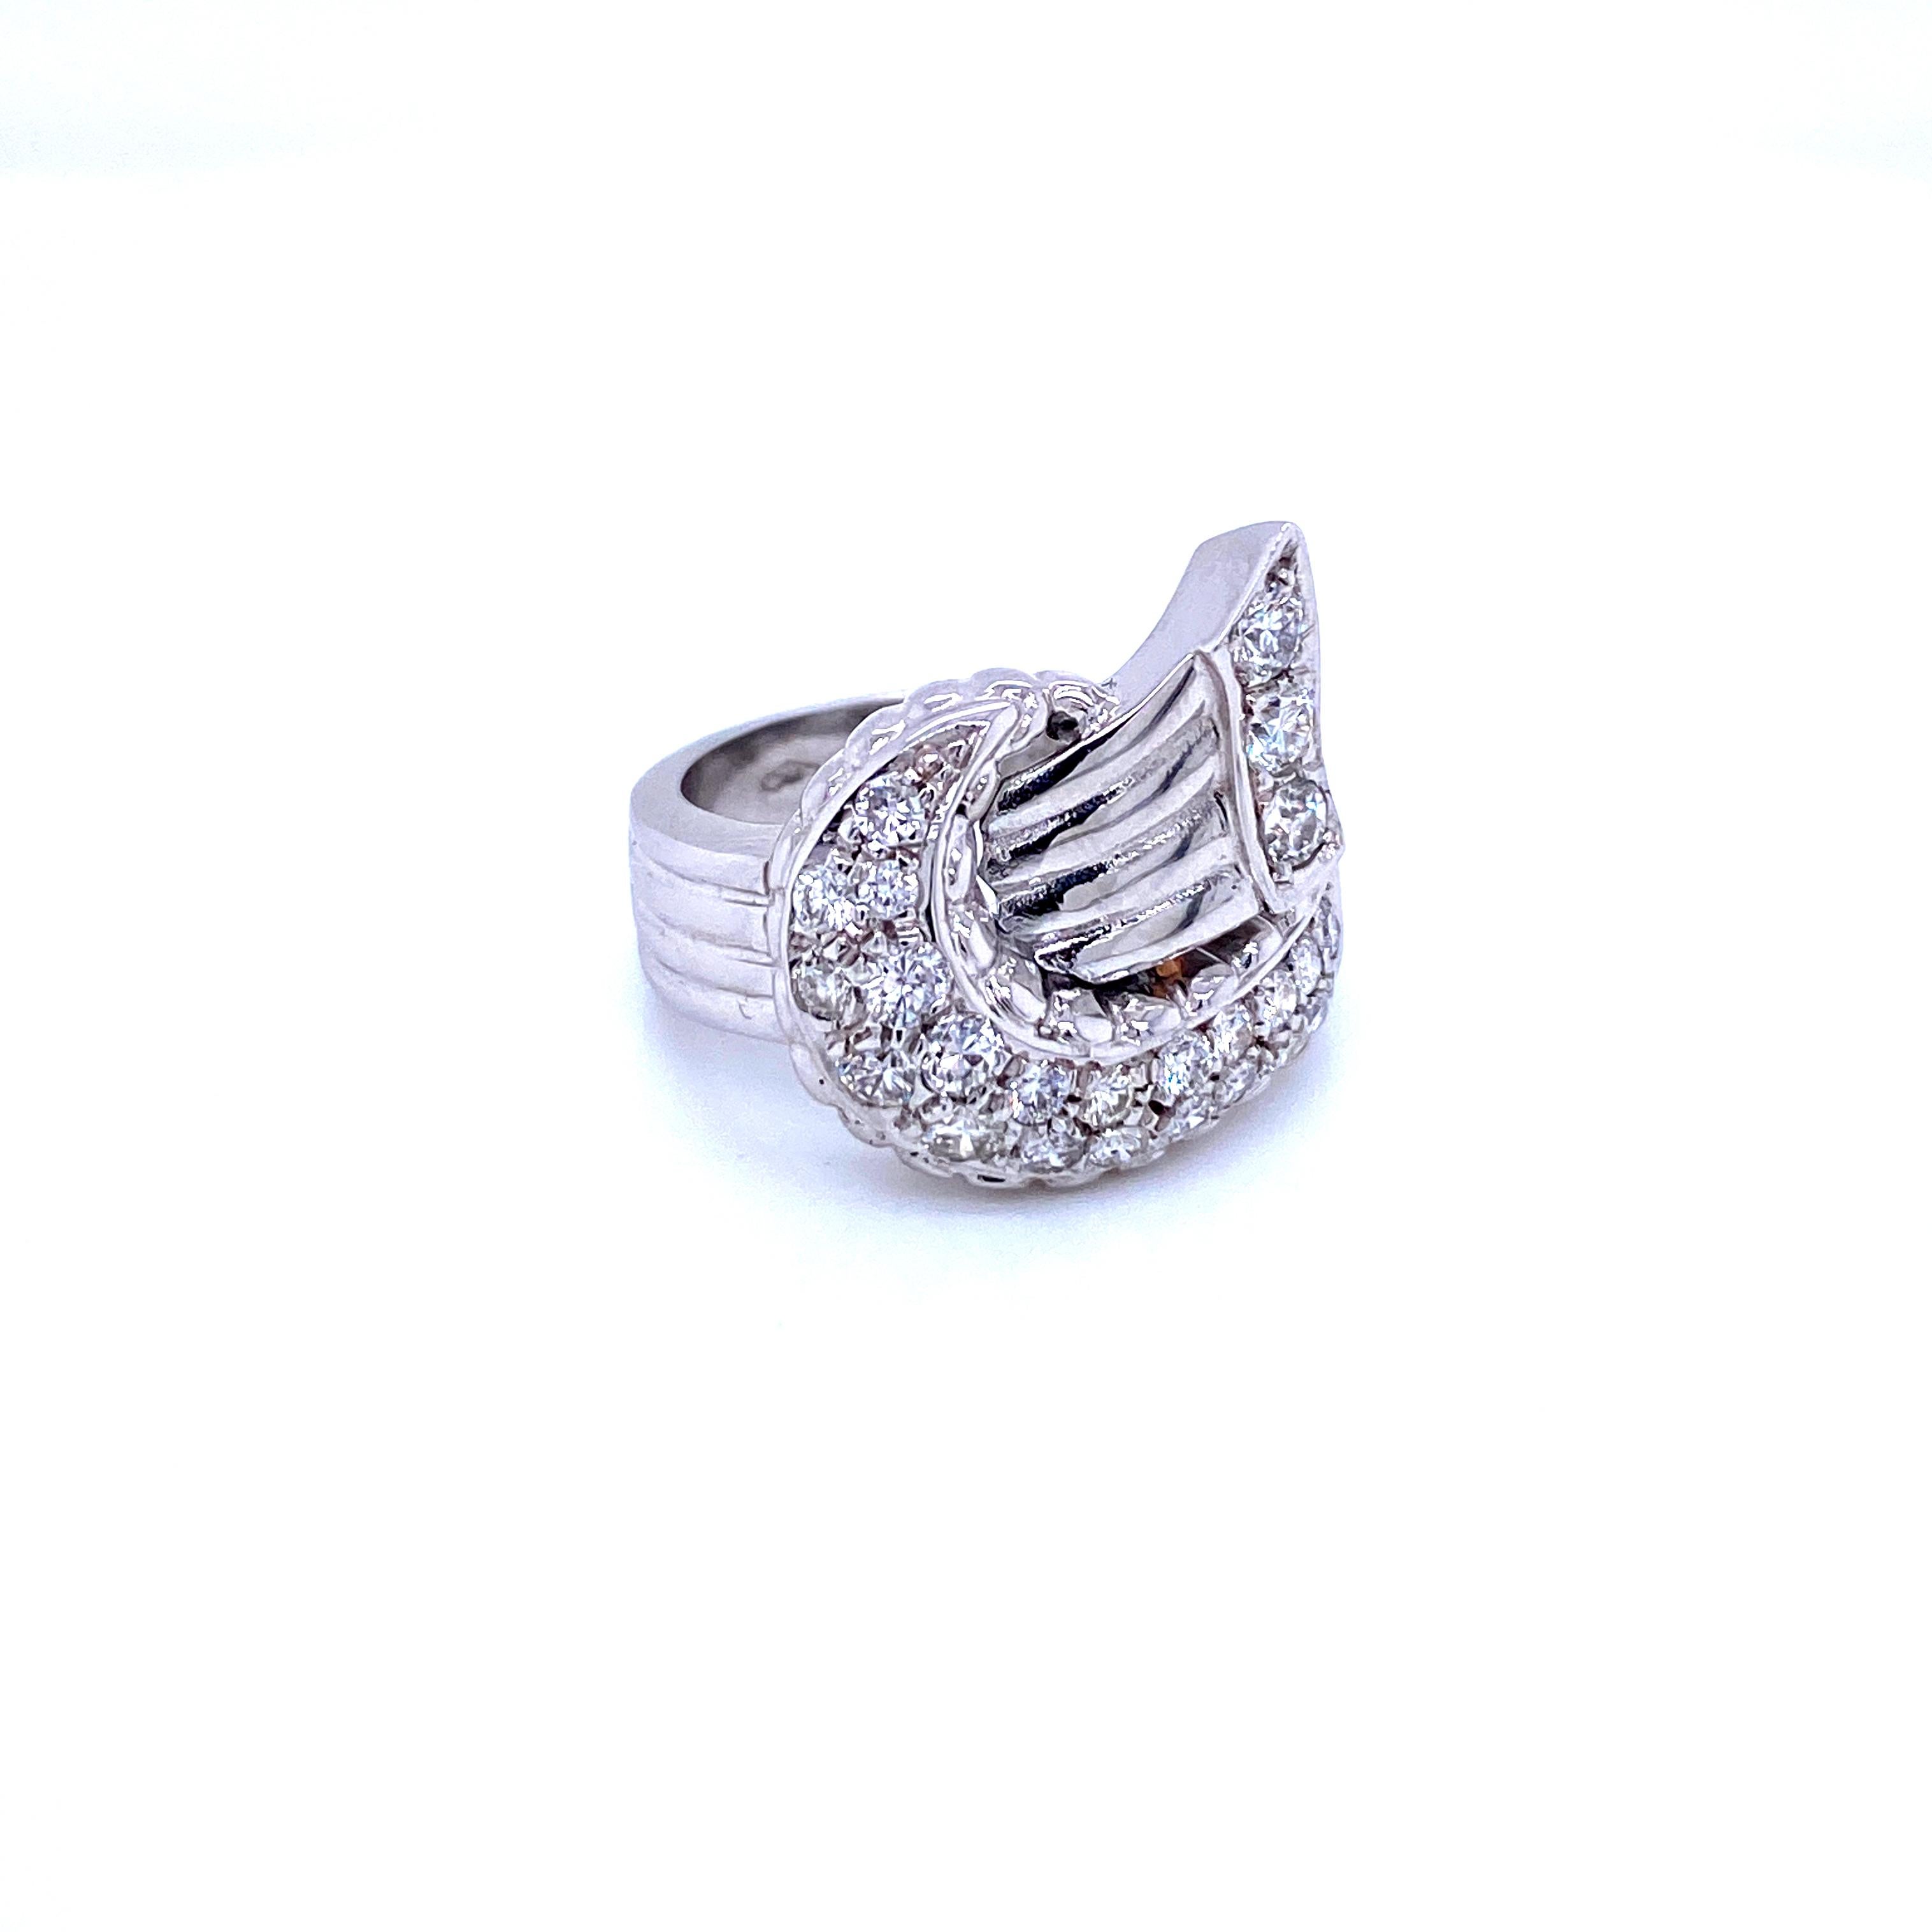 Unusual Art Deco Style ring hand crafted in 18k white Gold.
It is set with sparkling Round brilliant Cut Diamonds, pave setting, total weight 1.05 carats graded G color Vs2 clarity. 


Ring Size: US 8,5 - IT 18 - FR 58 - UK Q/R - resizable, free of